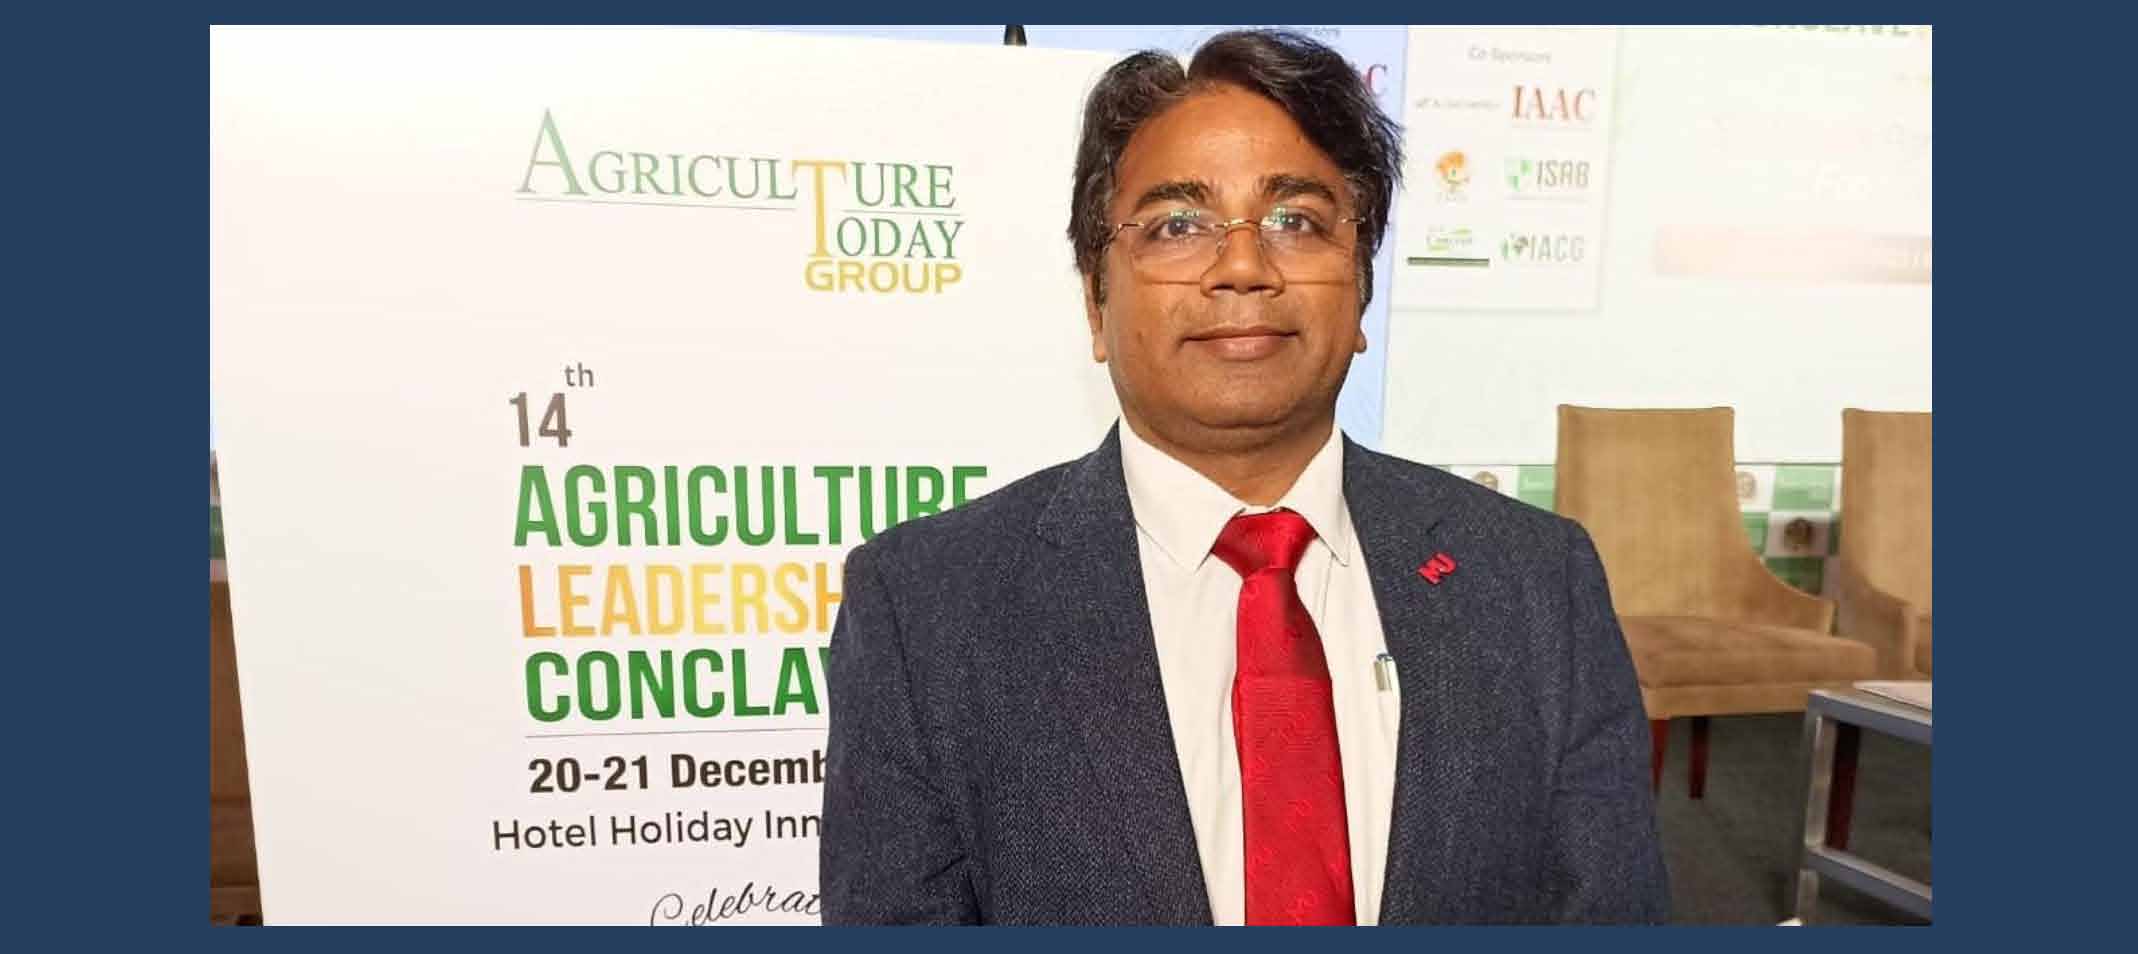 AgriTech and Rapid Delivery Systems are Key to Food Security – Prof. Rajeev Varshney